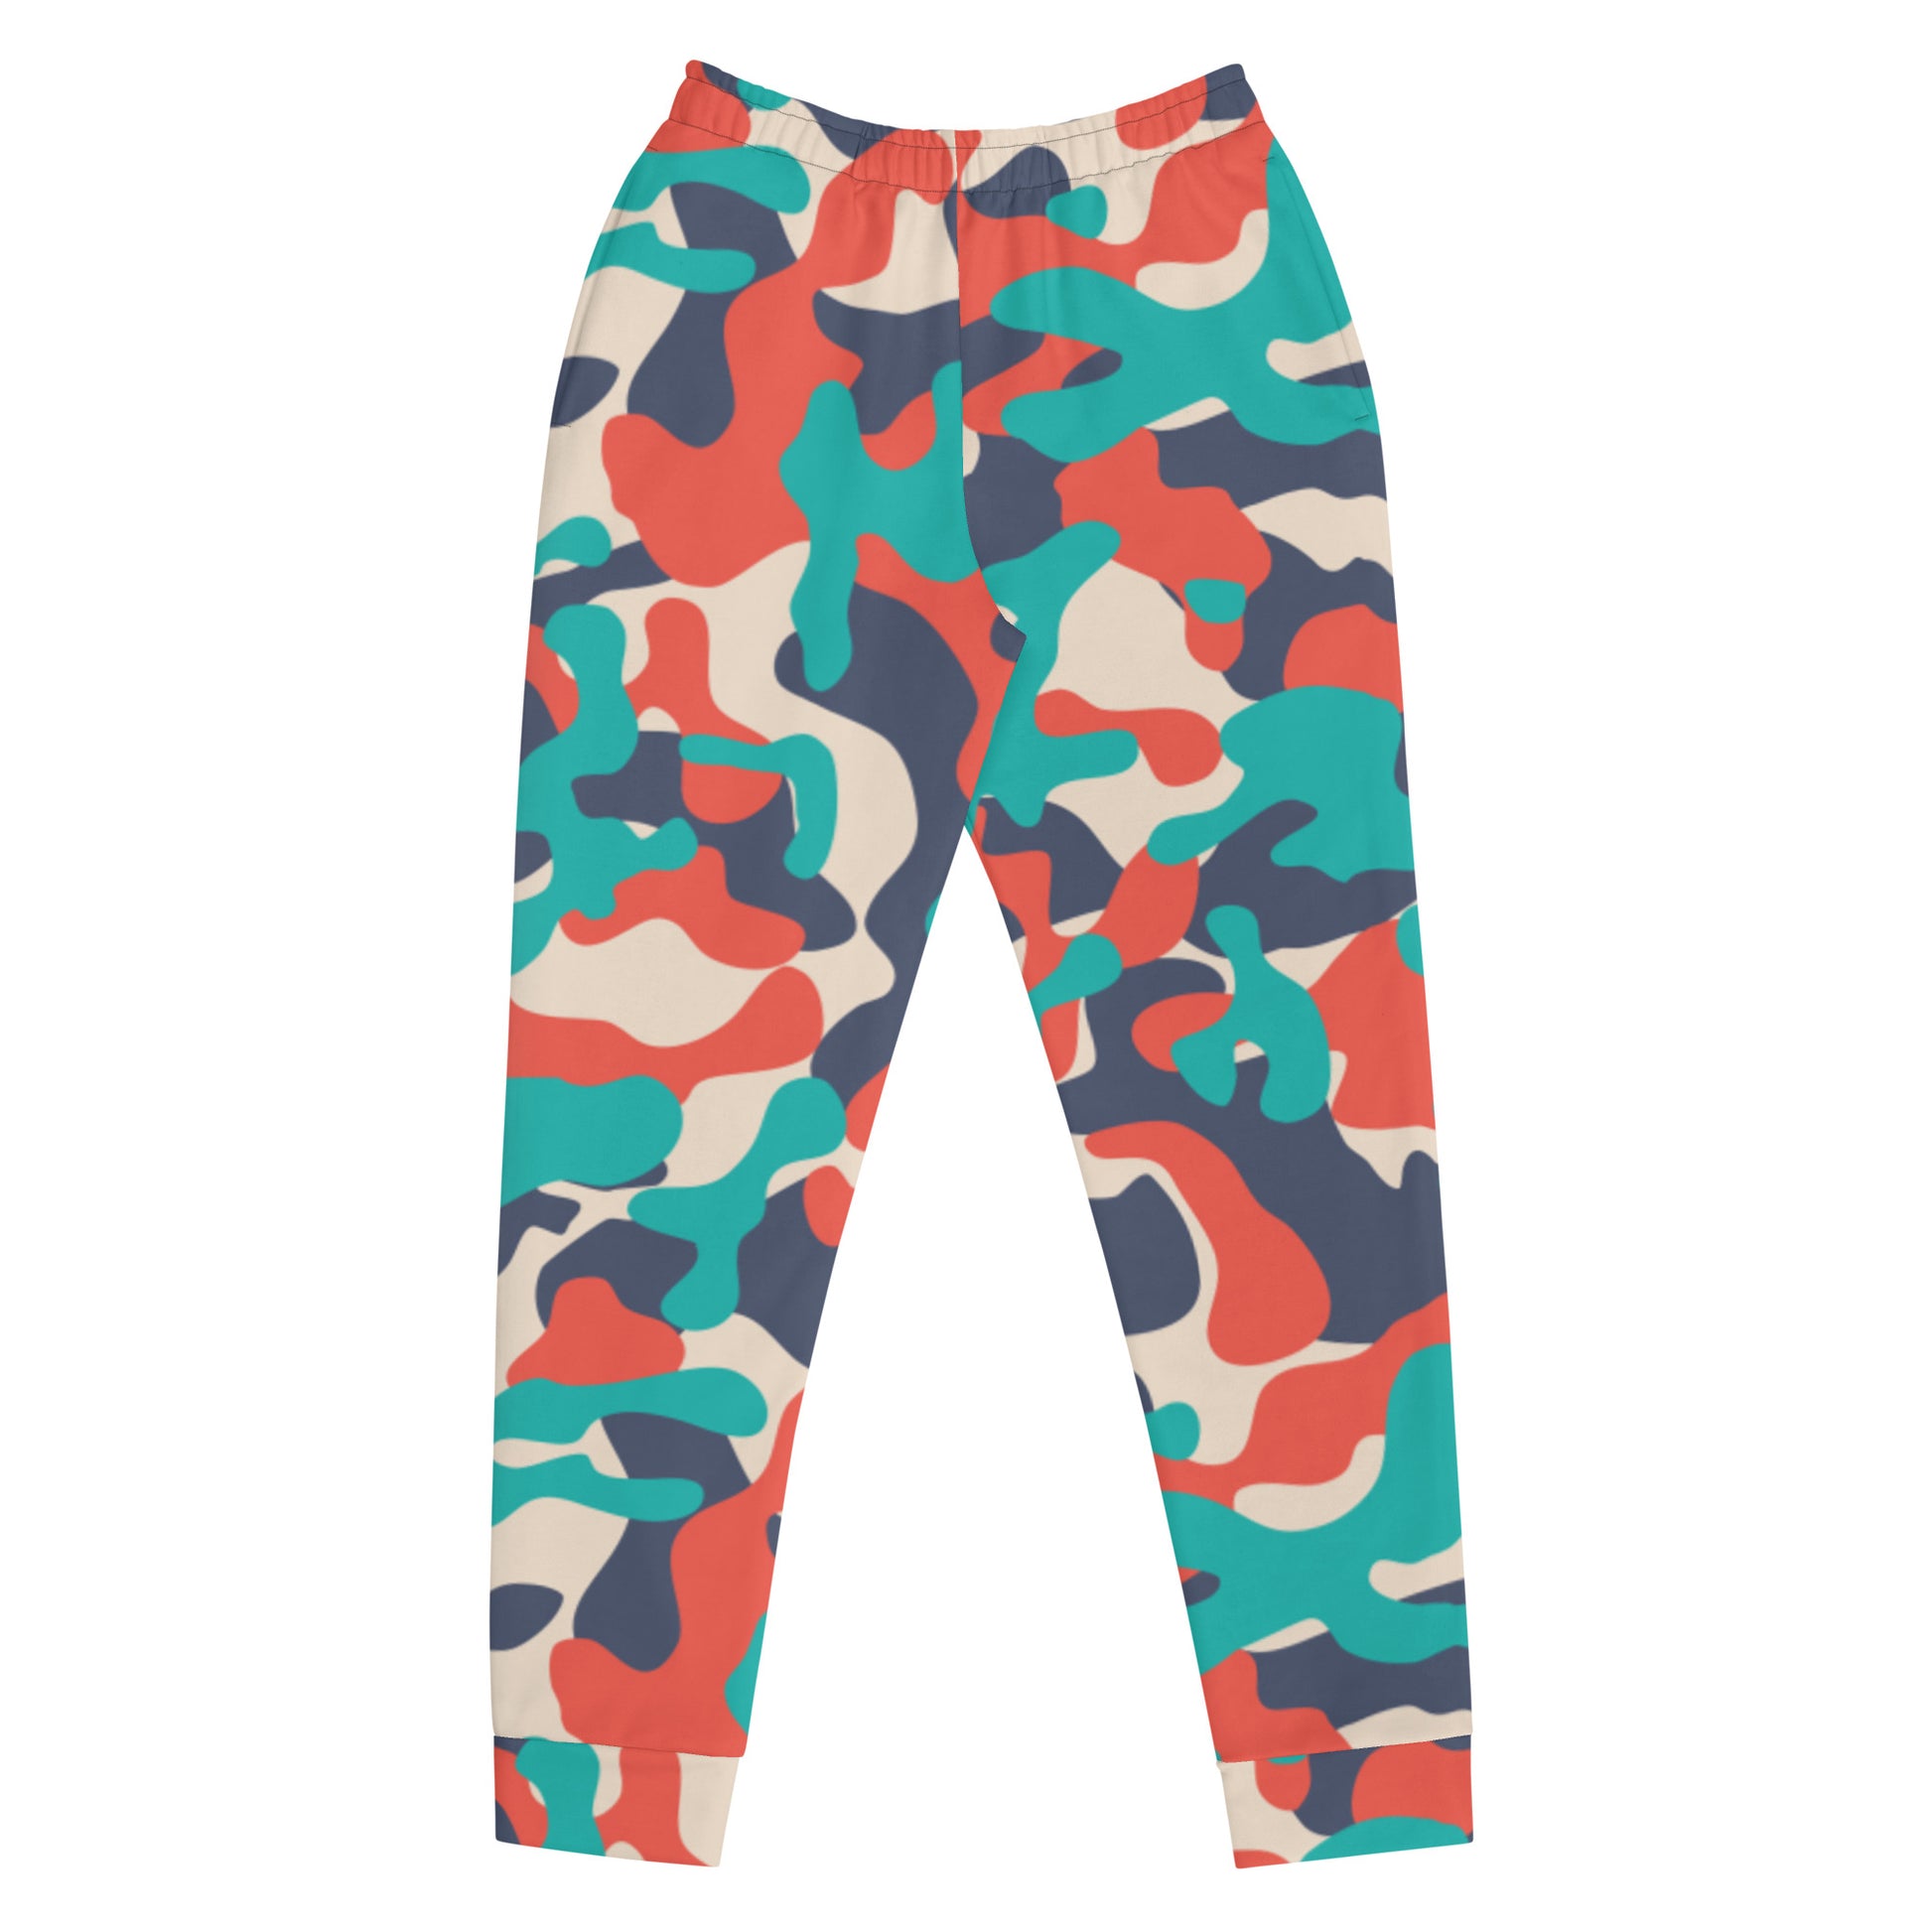 Retro mint and red camouflage Women's Joggers - Sport Finesse